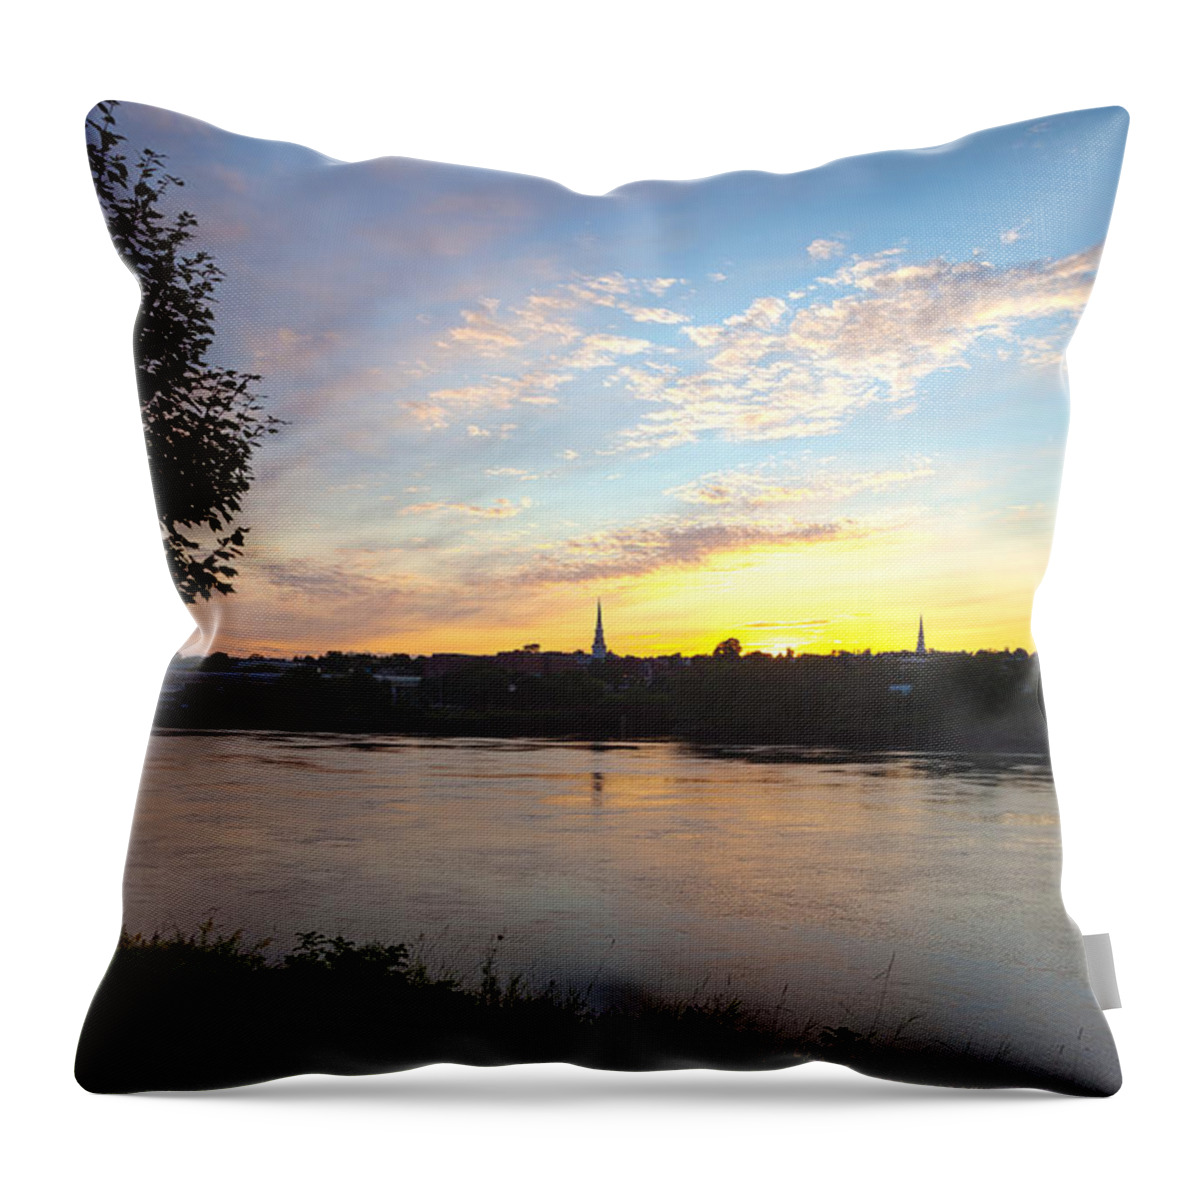 City Throw Pillow featuring the photograph Bangor Sunset by Melinda Fawver